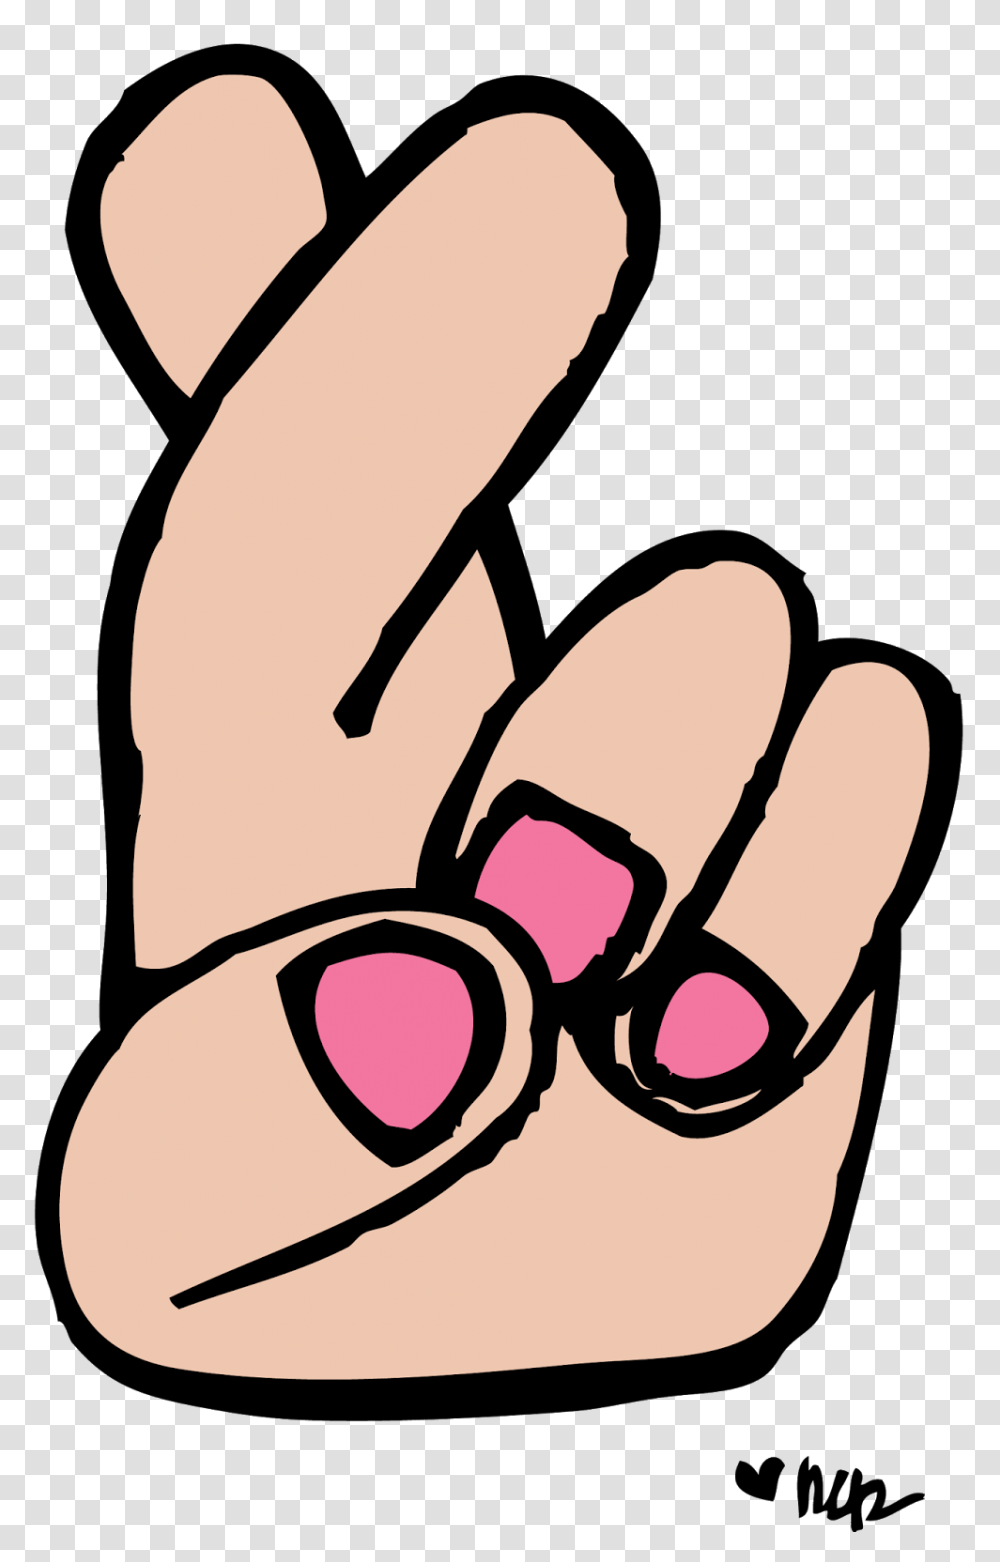 Crossed Fingers Clip Art, Hand, Nail, Manicure Transparent Png